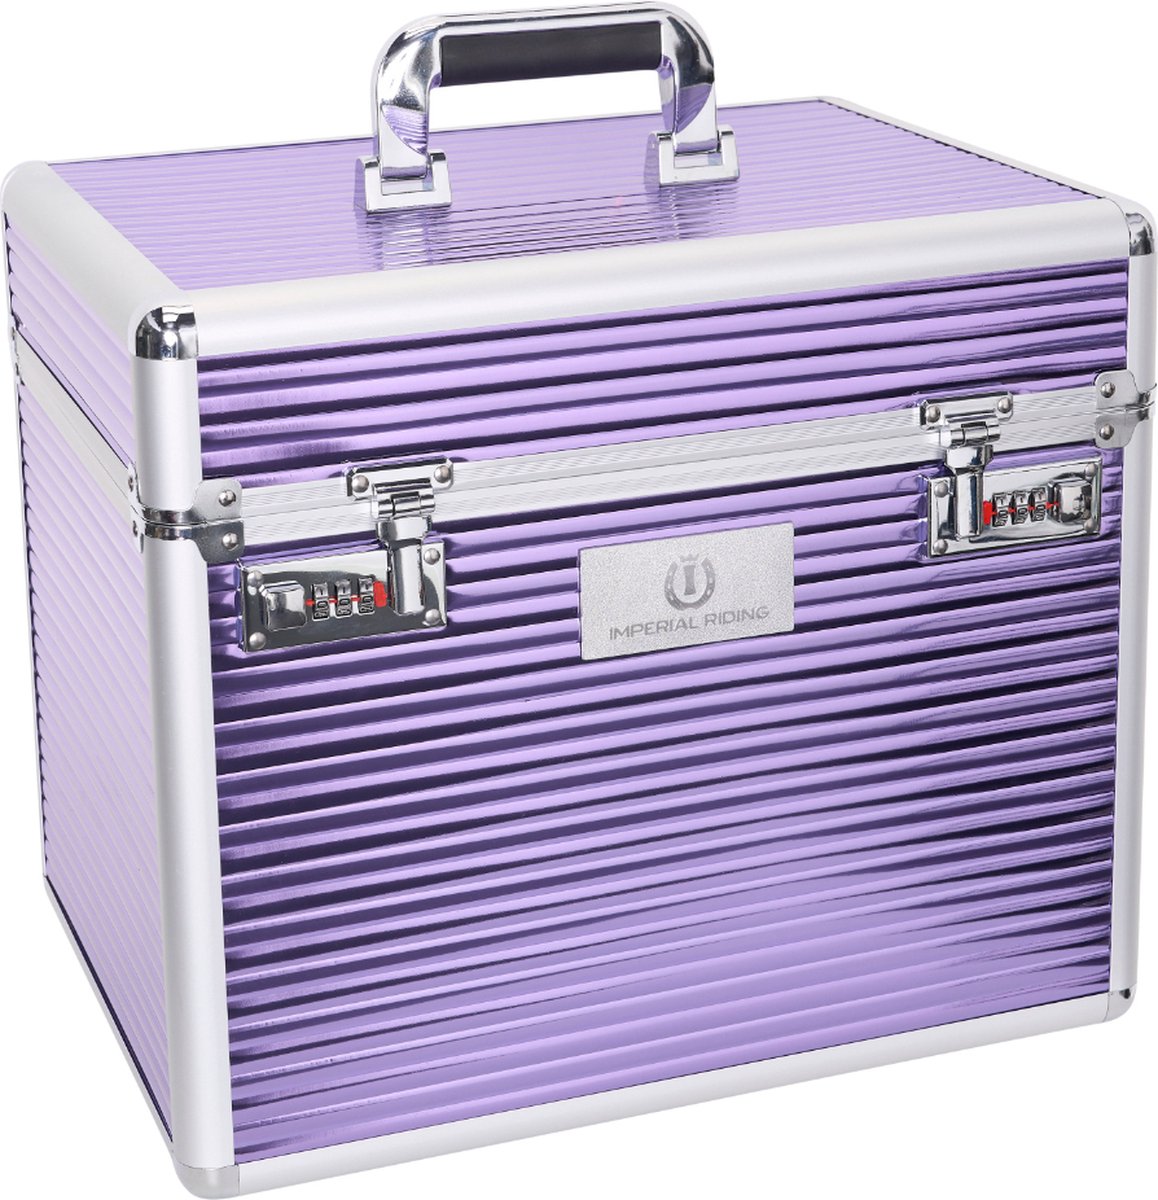 Imperial Riding - Grooming Box Shiny Classic - Lilac - Imperial Riding